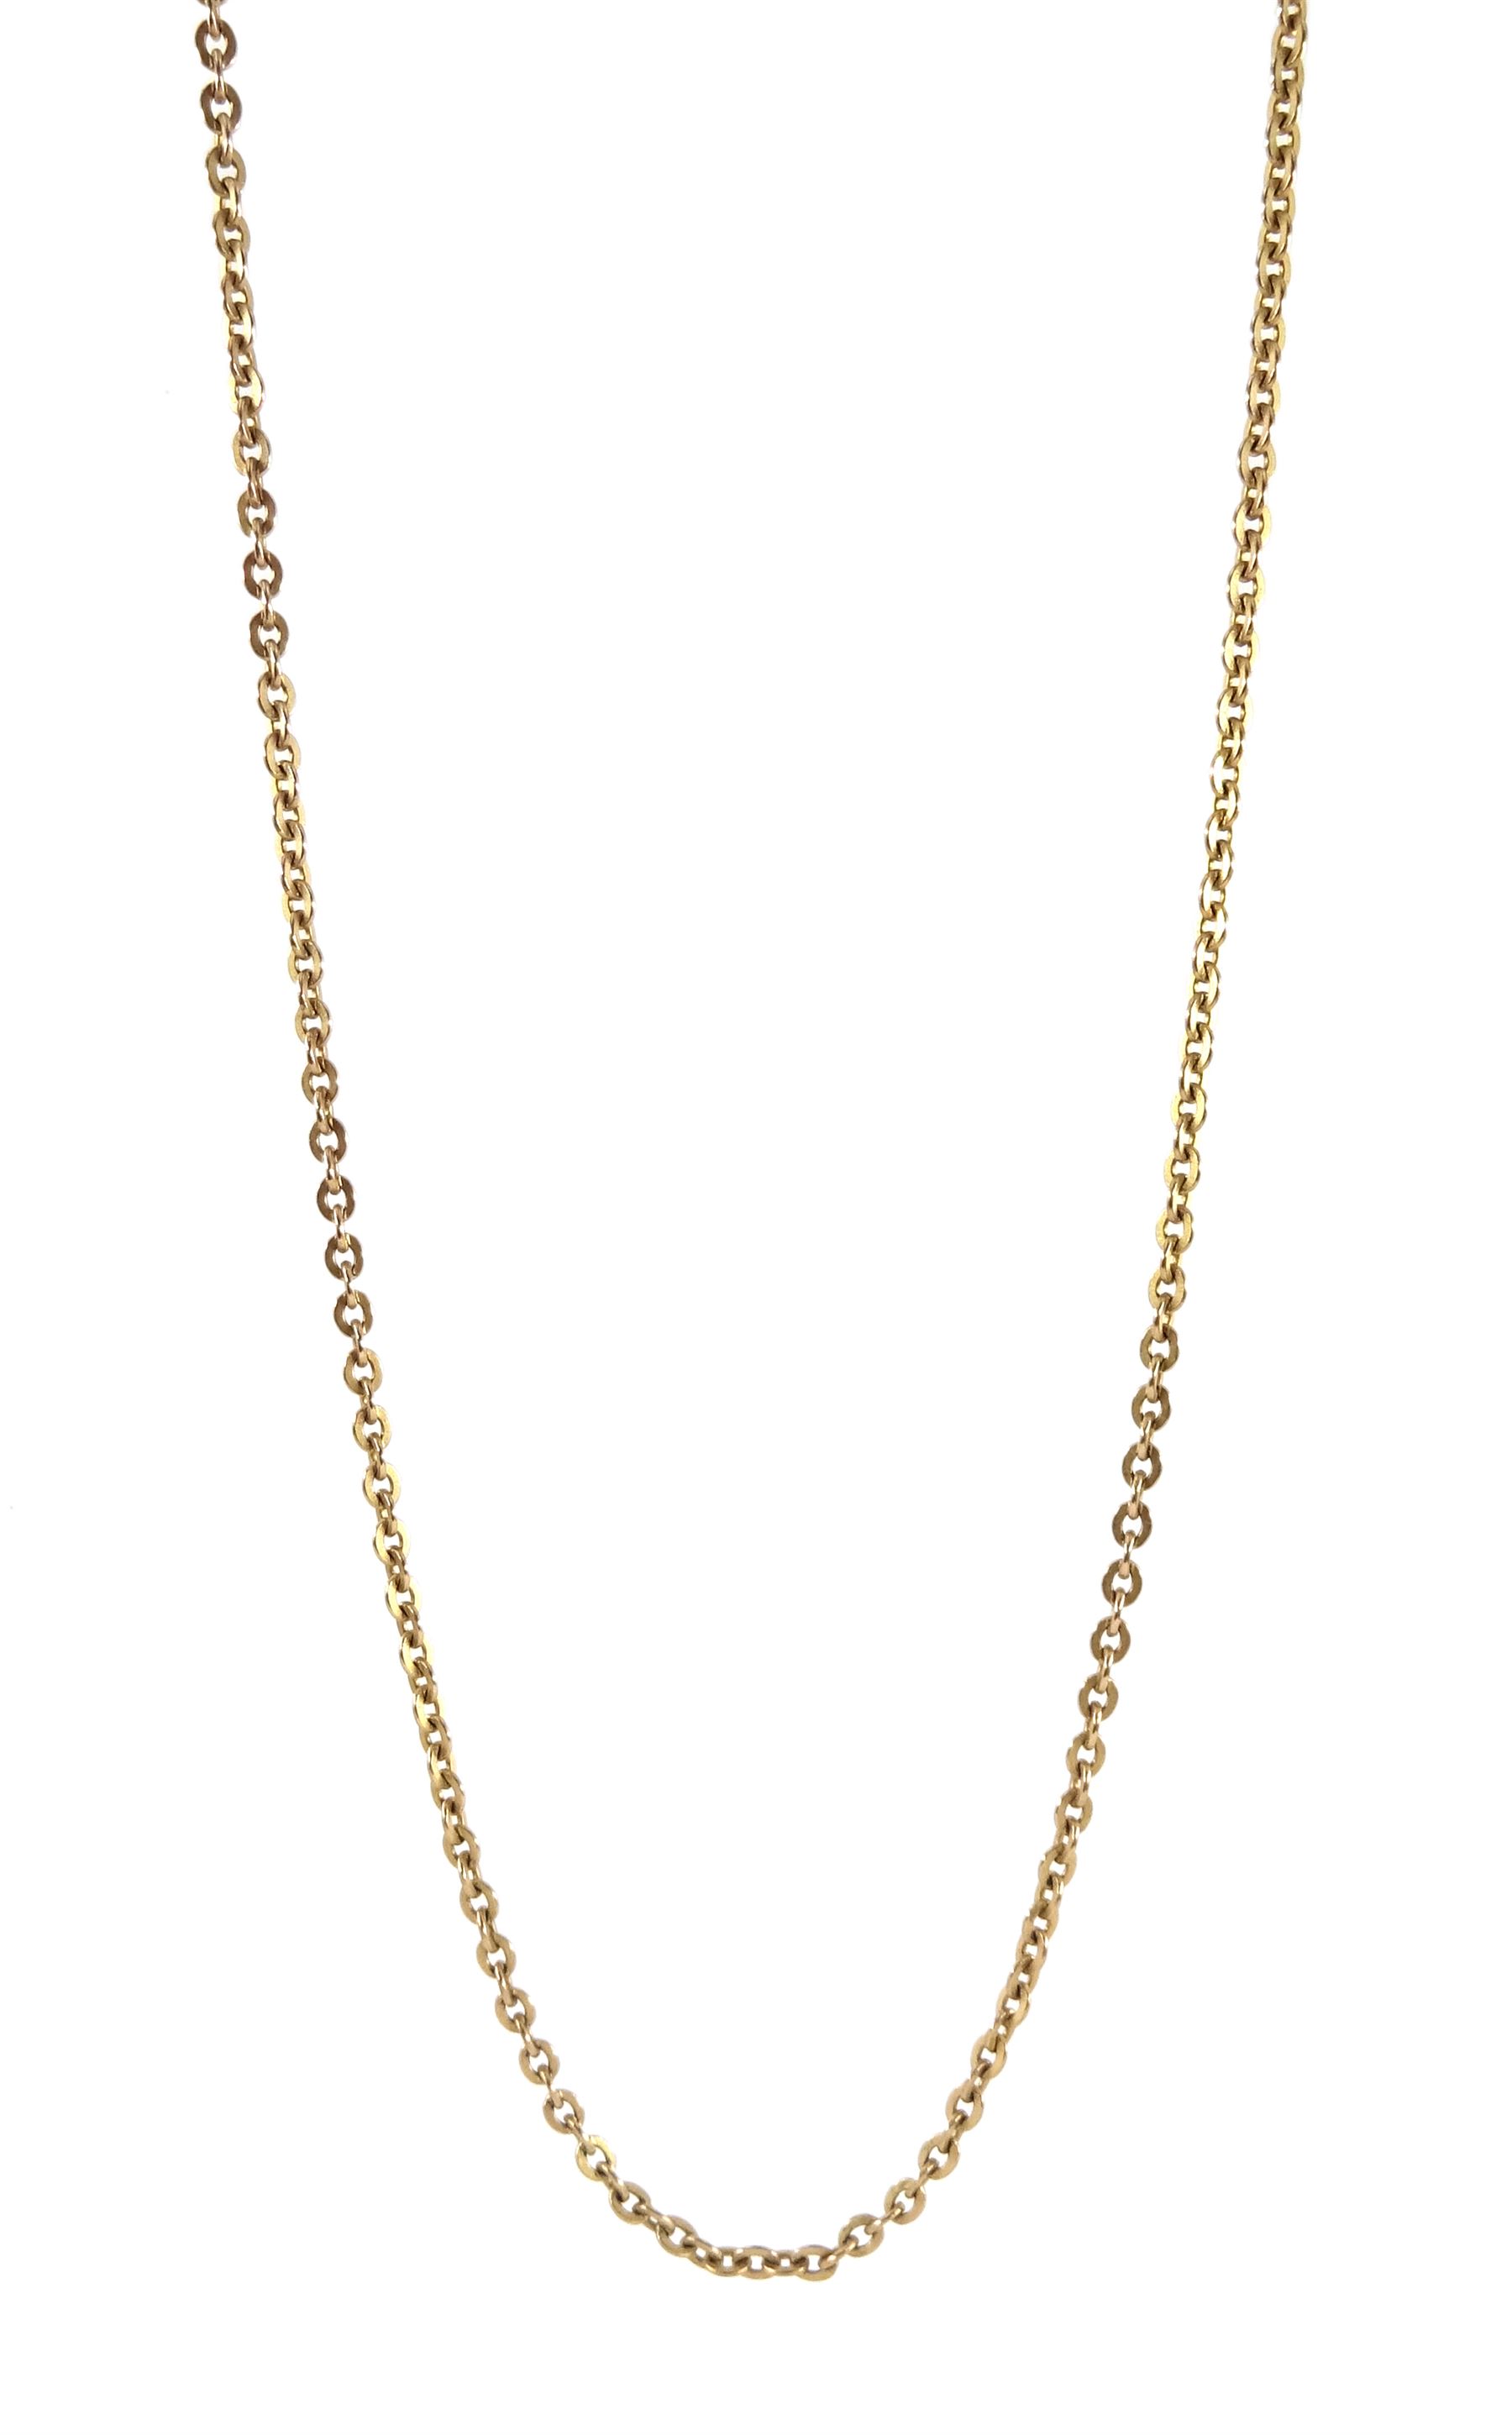 Gold link chain necklace stamped 9ct